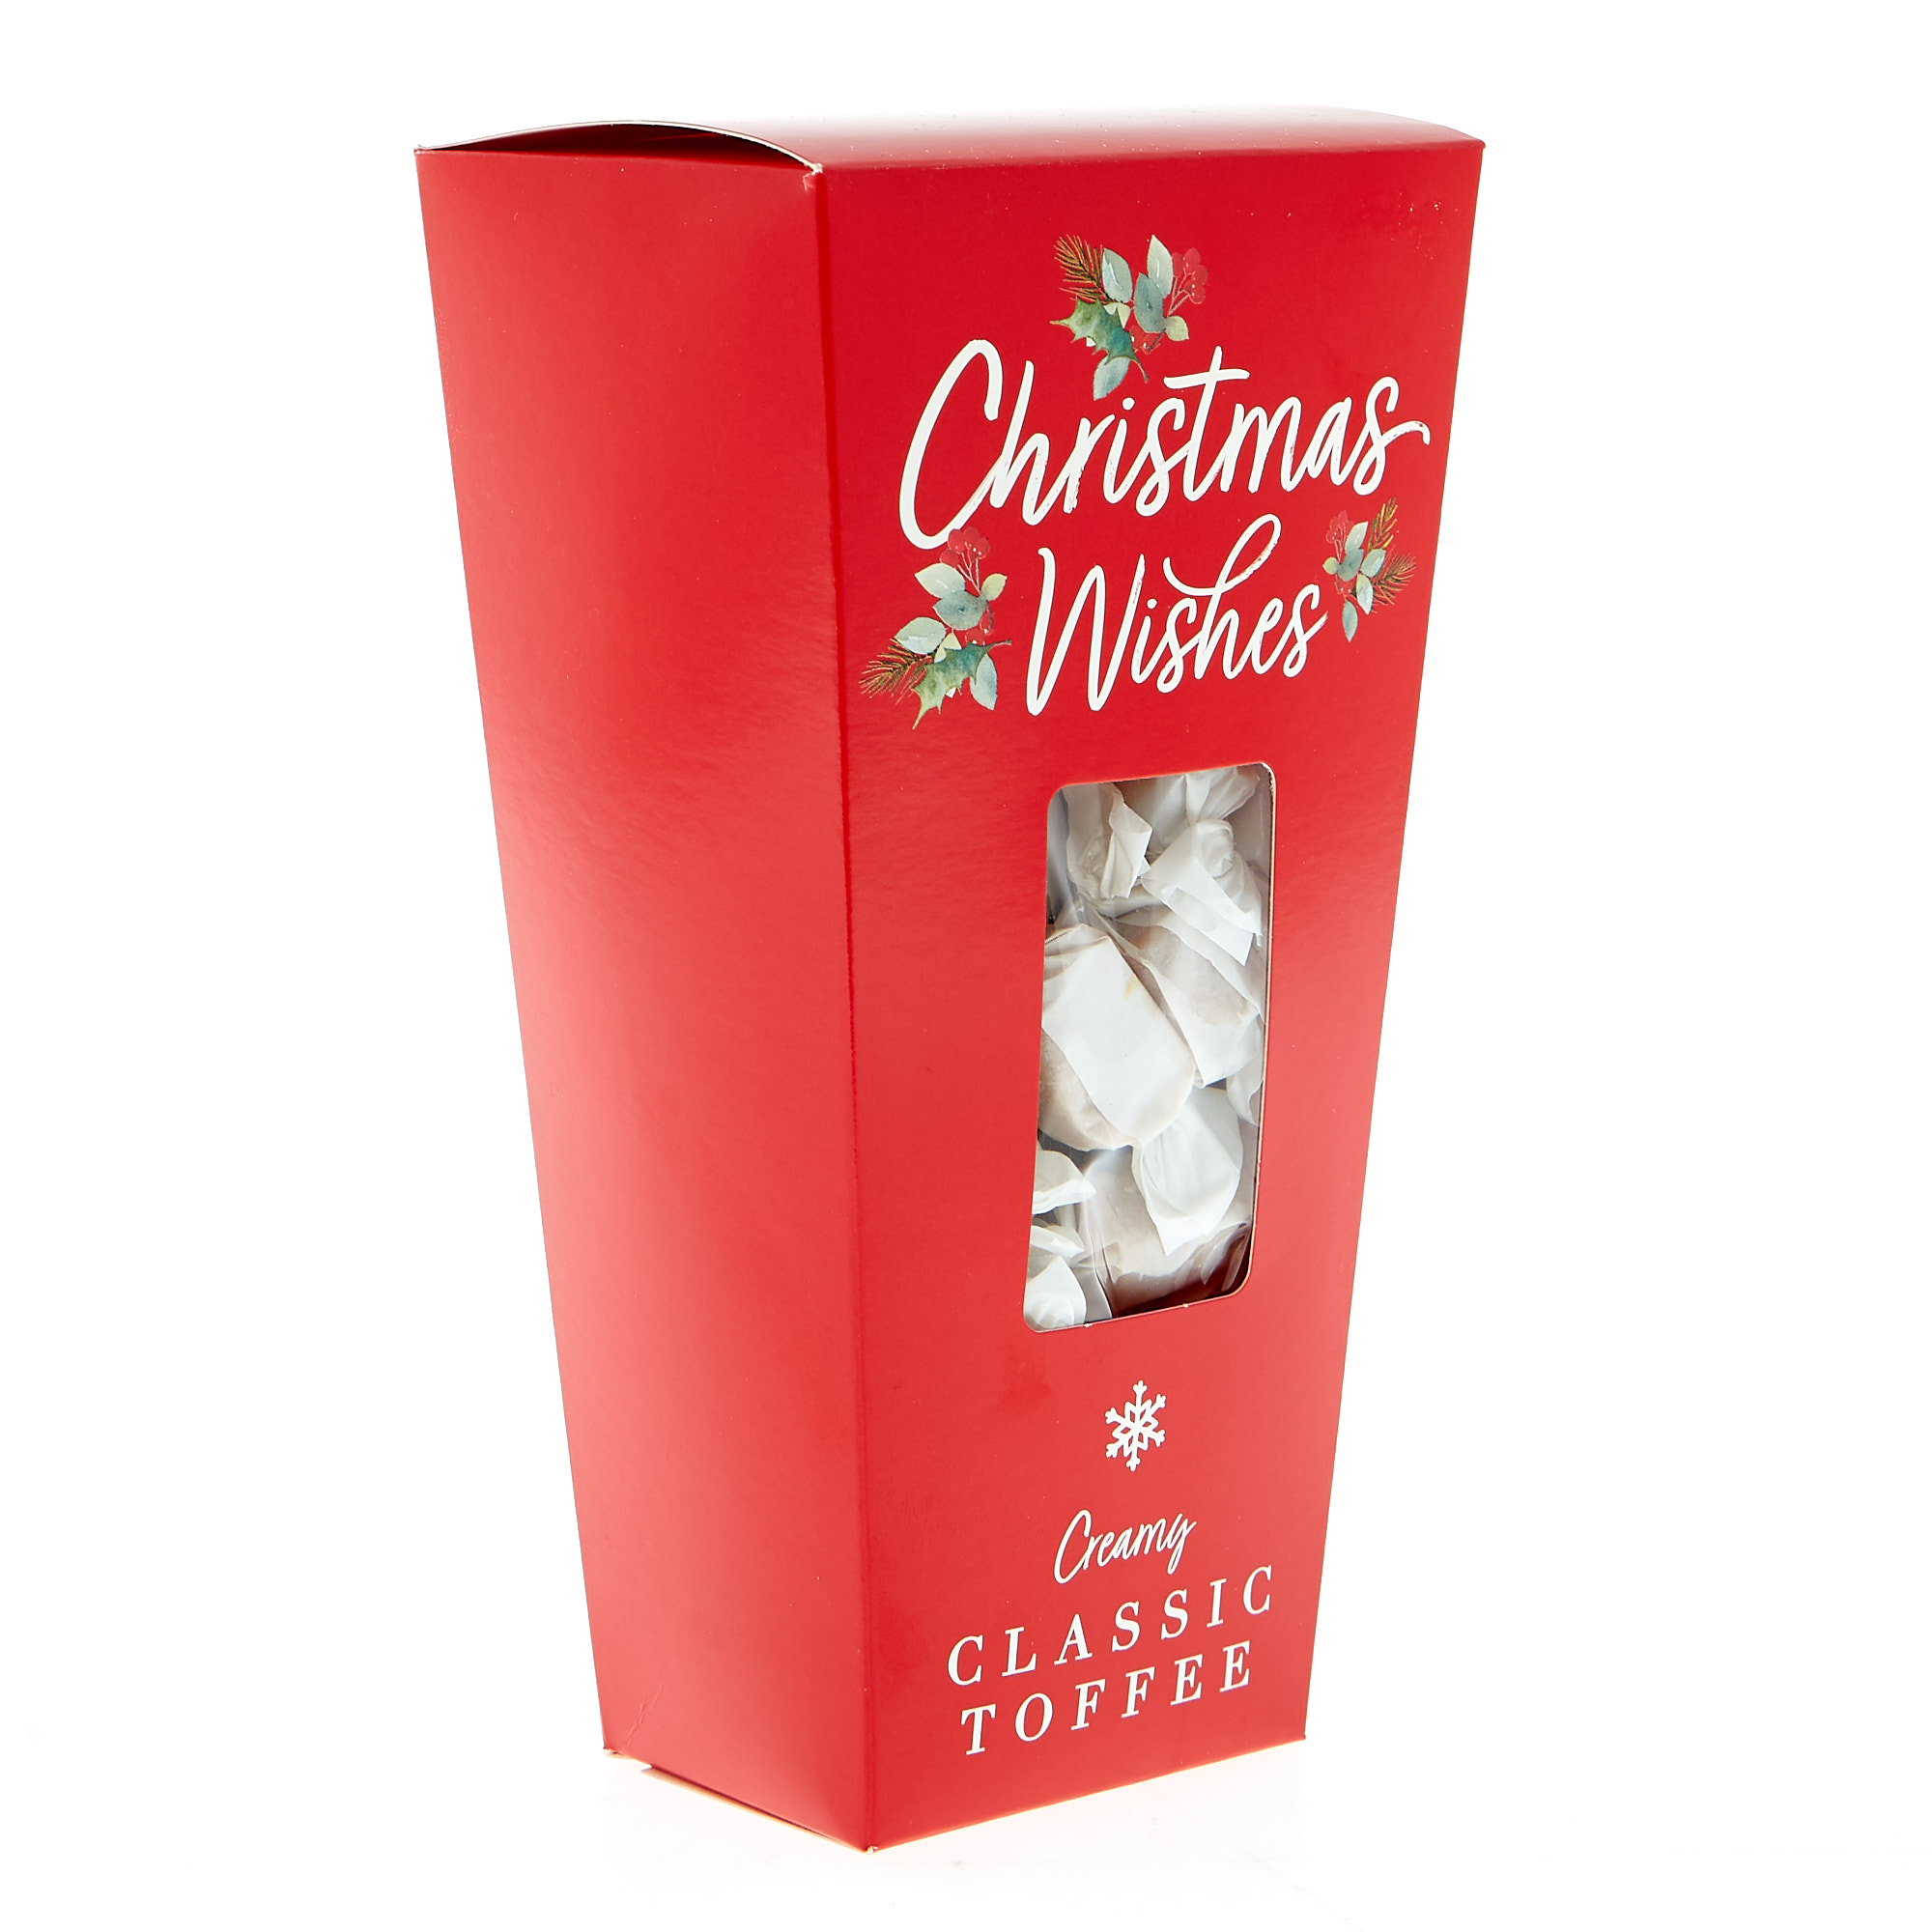 Christmas Wishes Creamy Classic Toffee